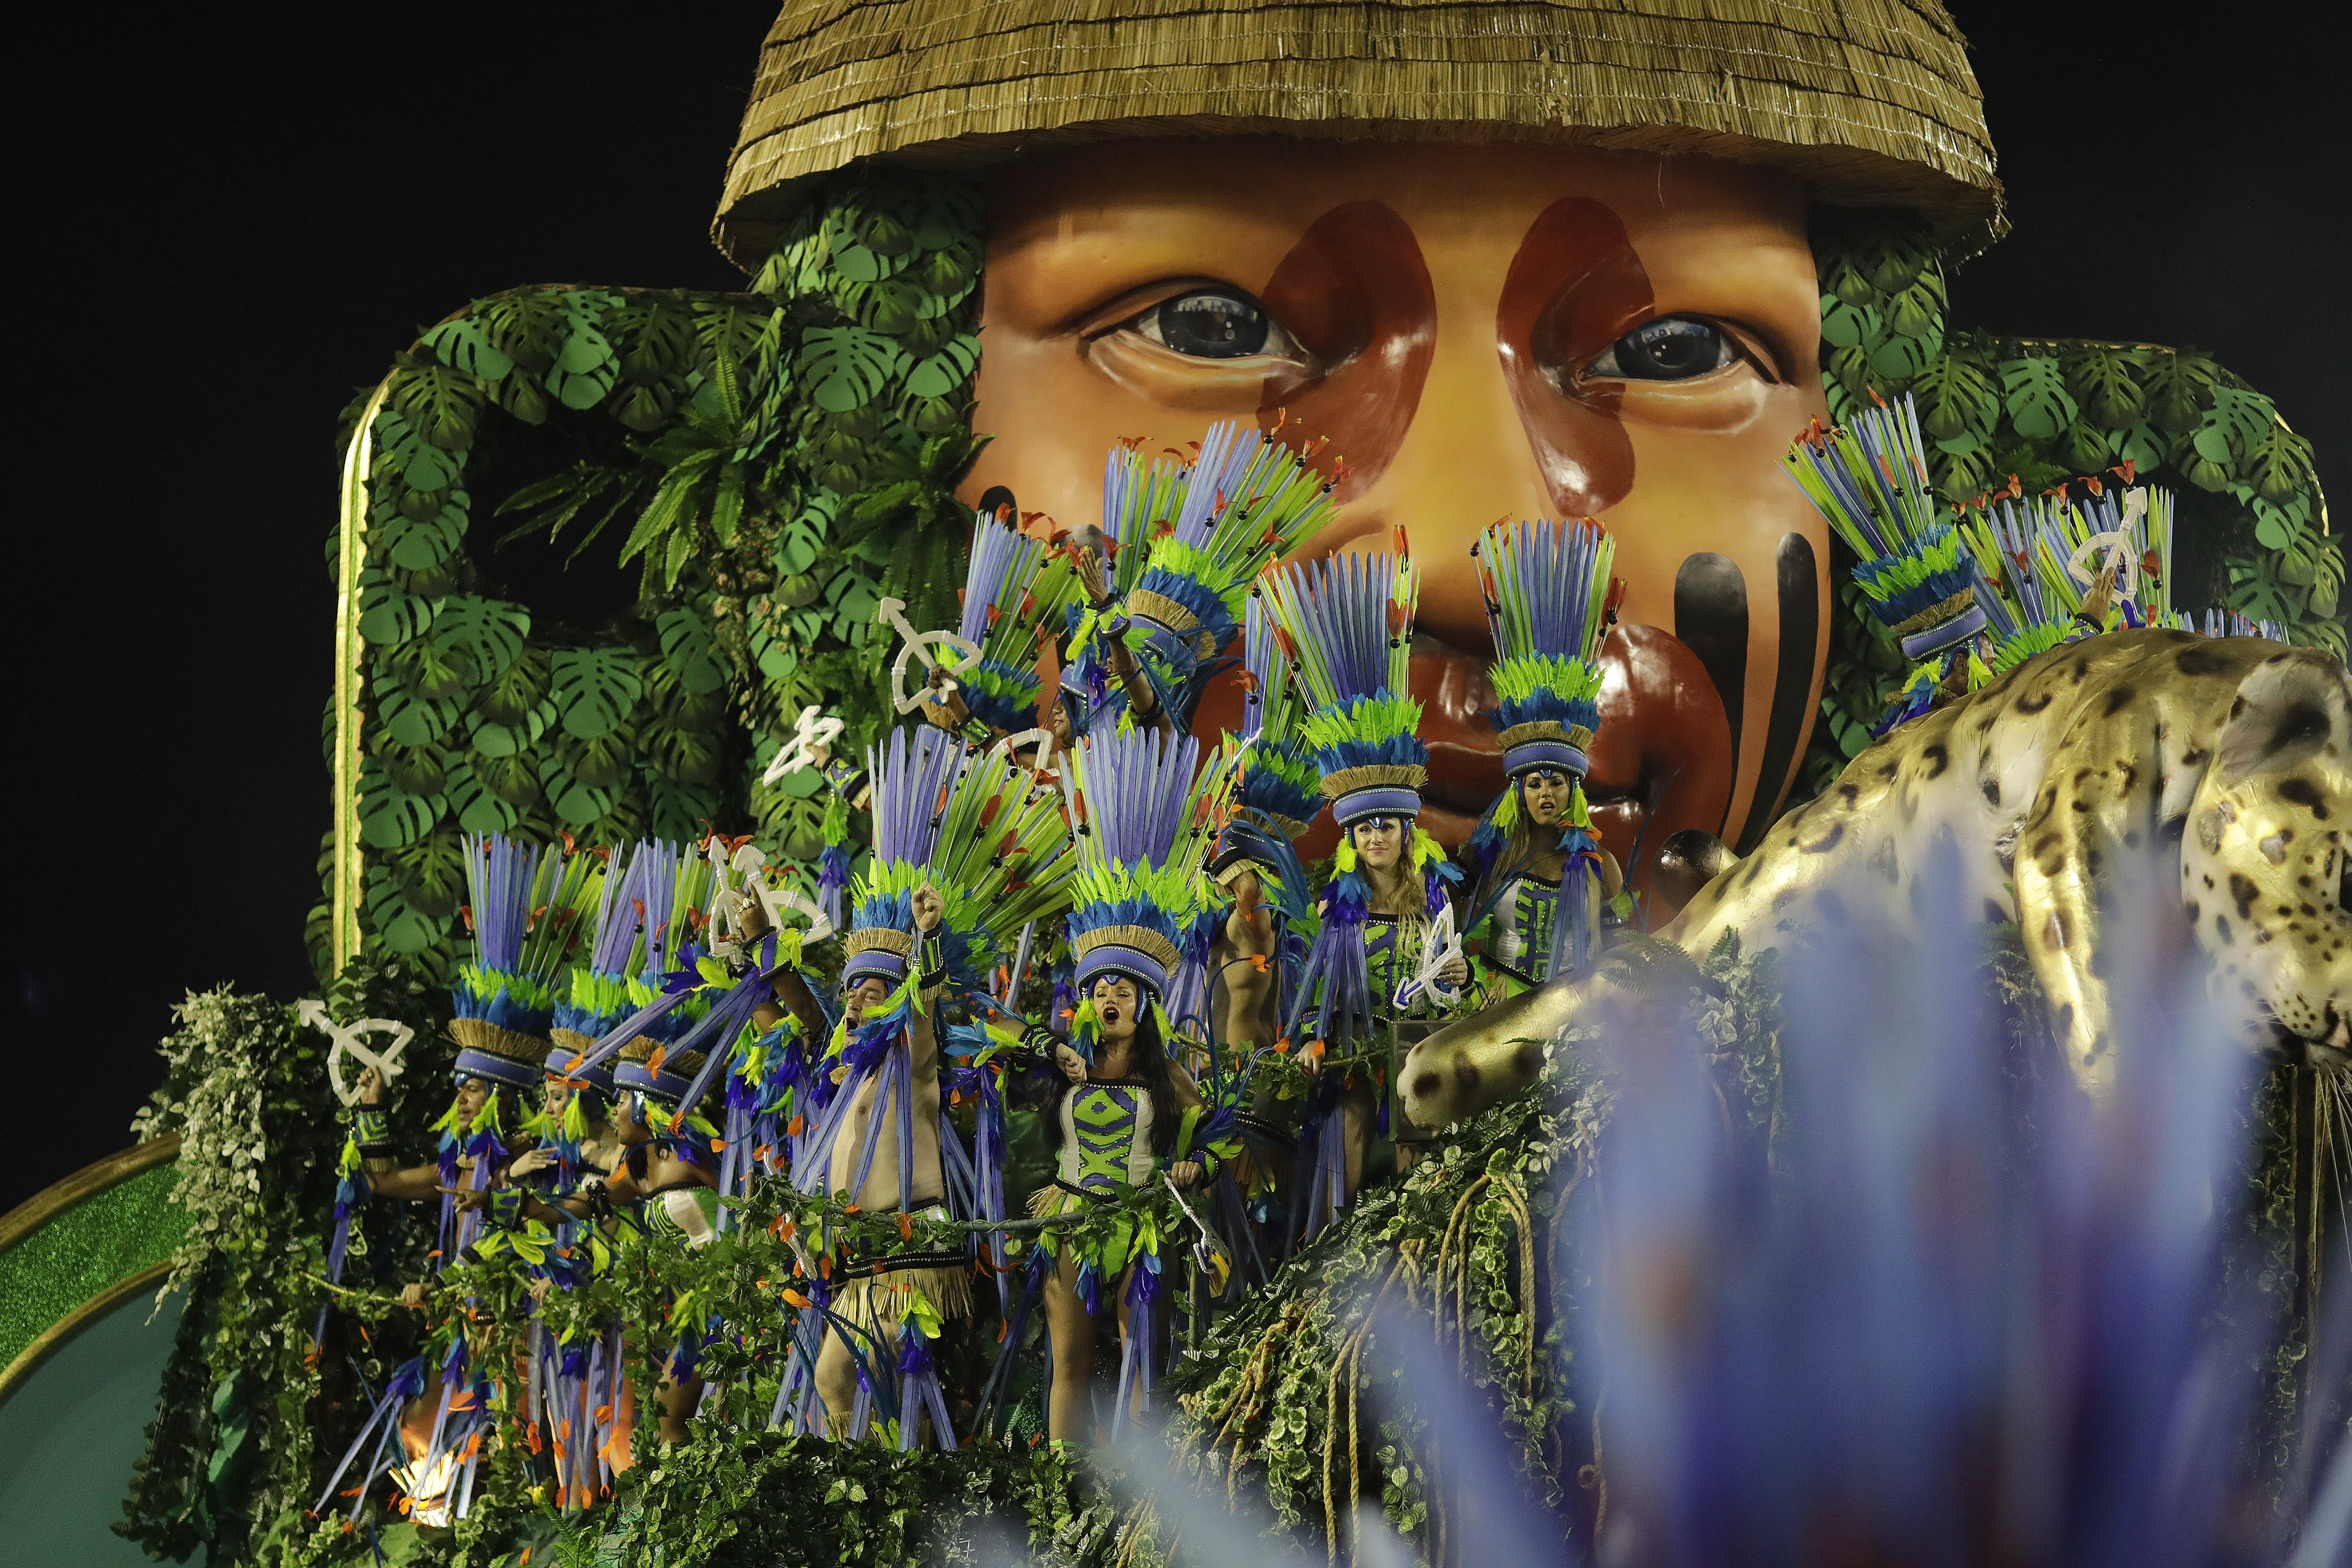 Performers from the Mangueira samba school parade on a float during Carnival celebrations at the Sambadrome in Rio de Janeiro, Brazil, Tuesday, March 5, 2019. (AP Photo/Leo Correa)